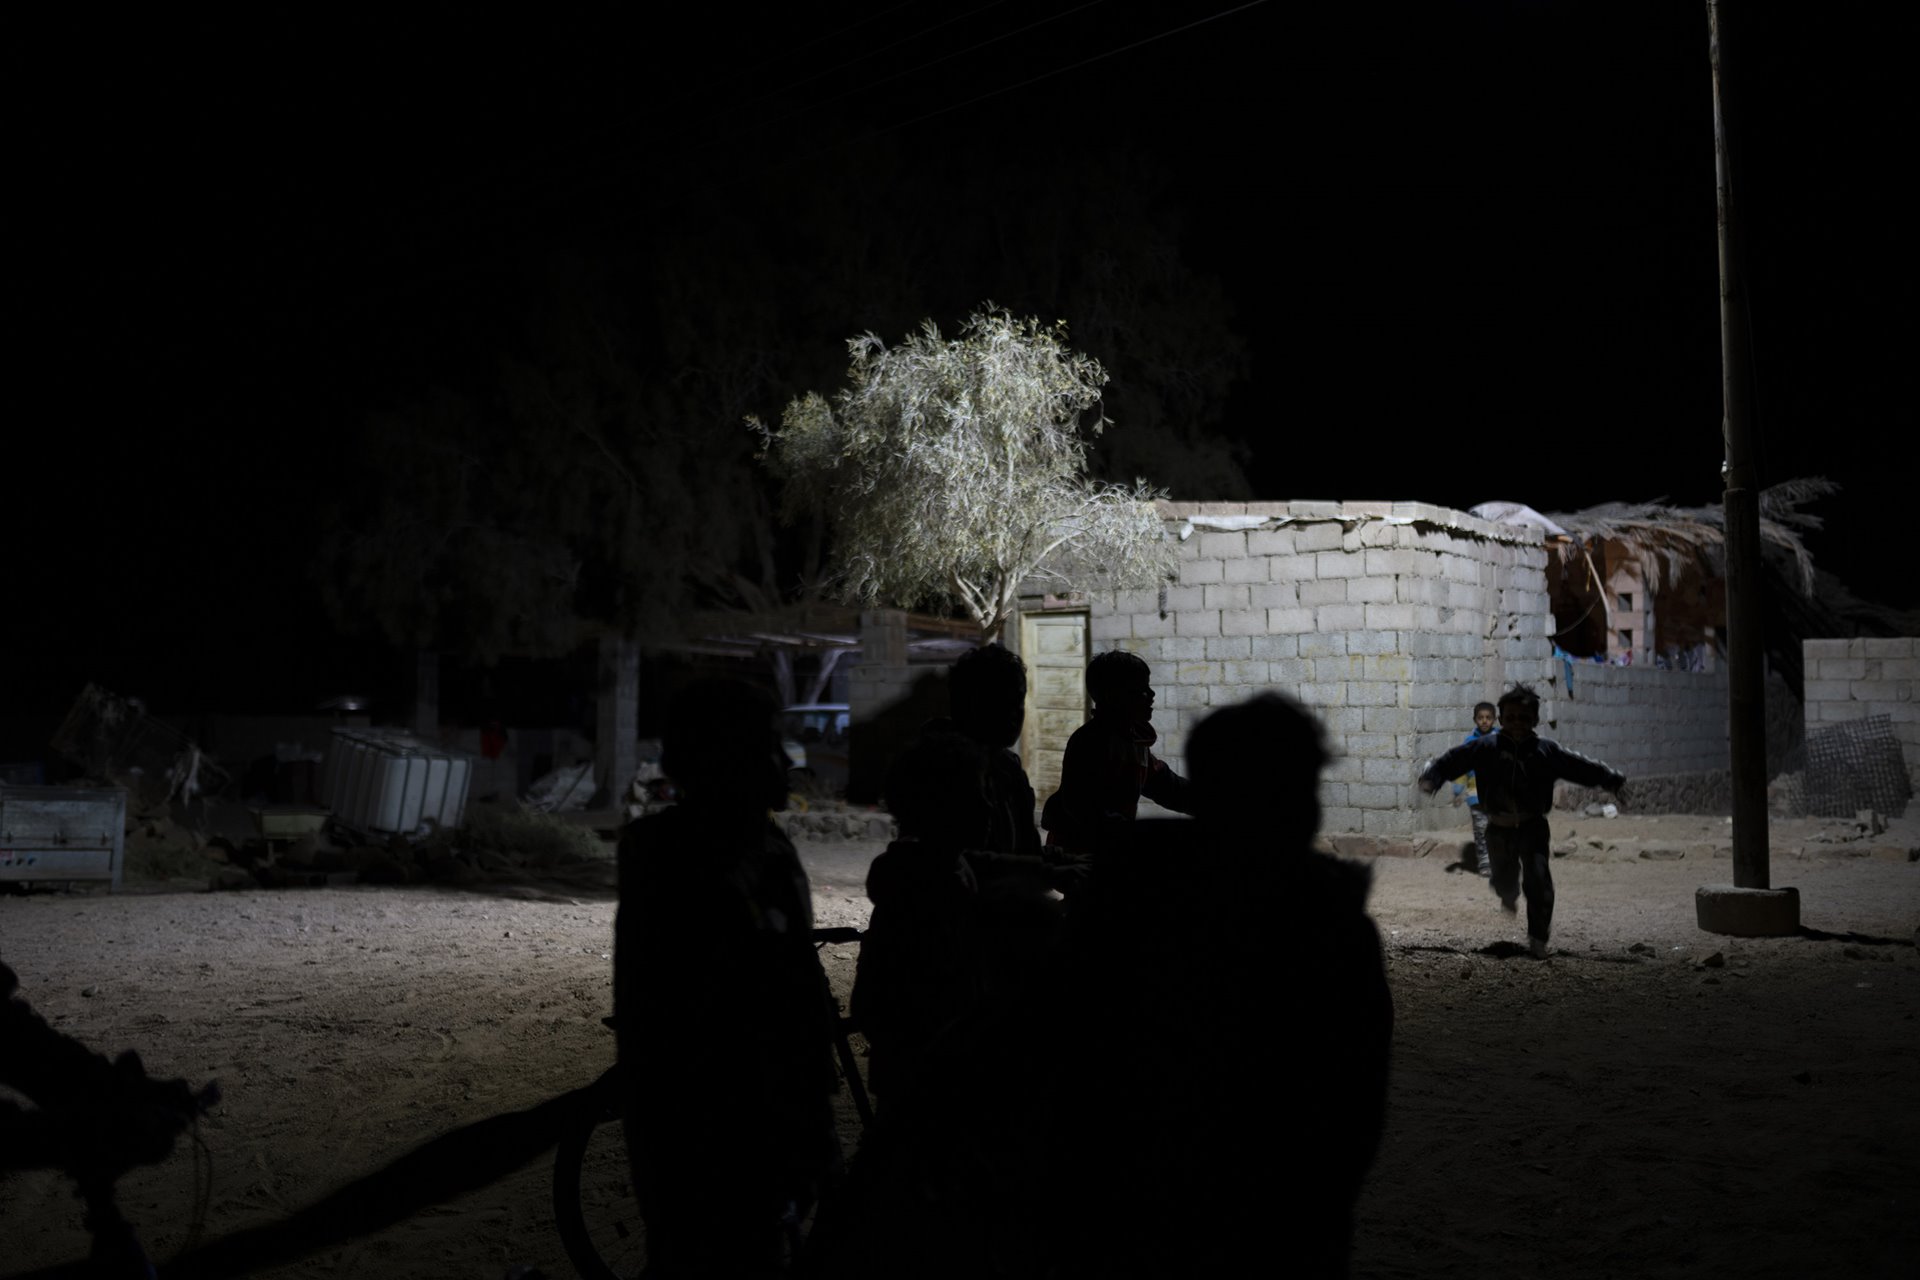 Children play at night in St. Catherine, South Sinai, Egypt. Due to a lack of enough electricity and resources, the day ends at nightfall. Children often remain awake and play underneath the few streetlights in their village.